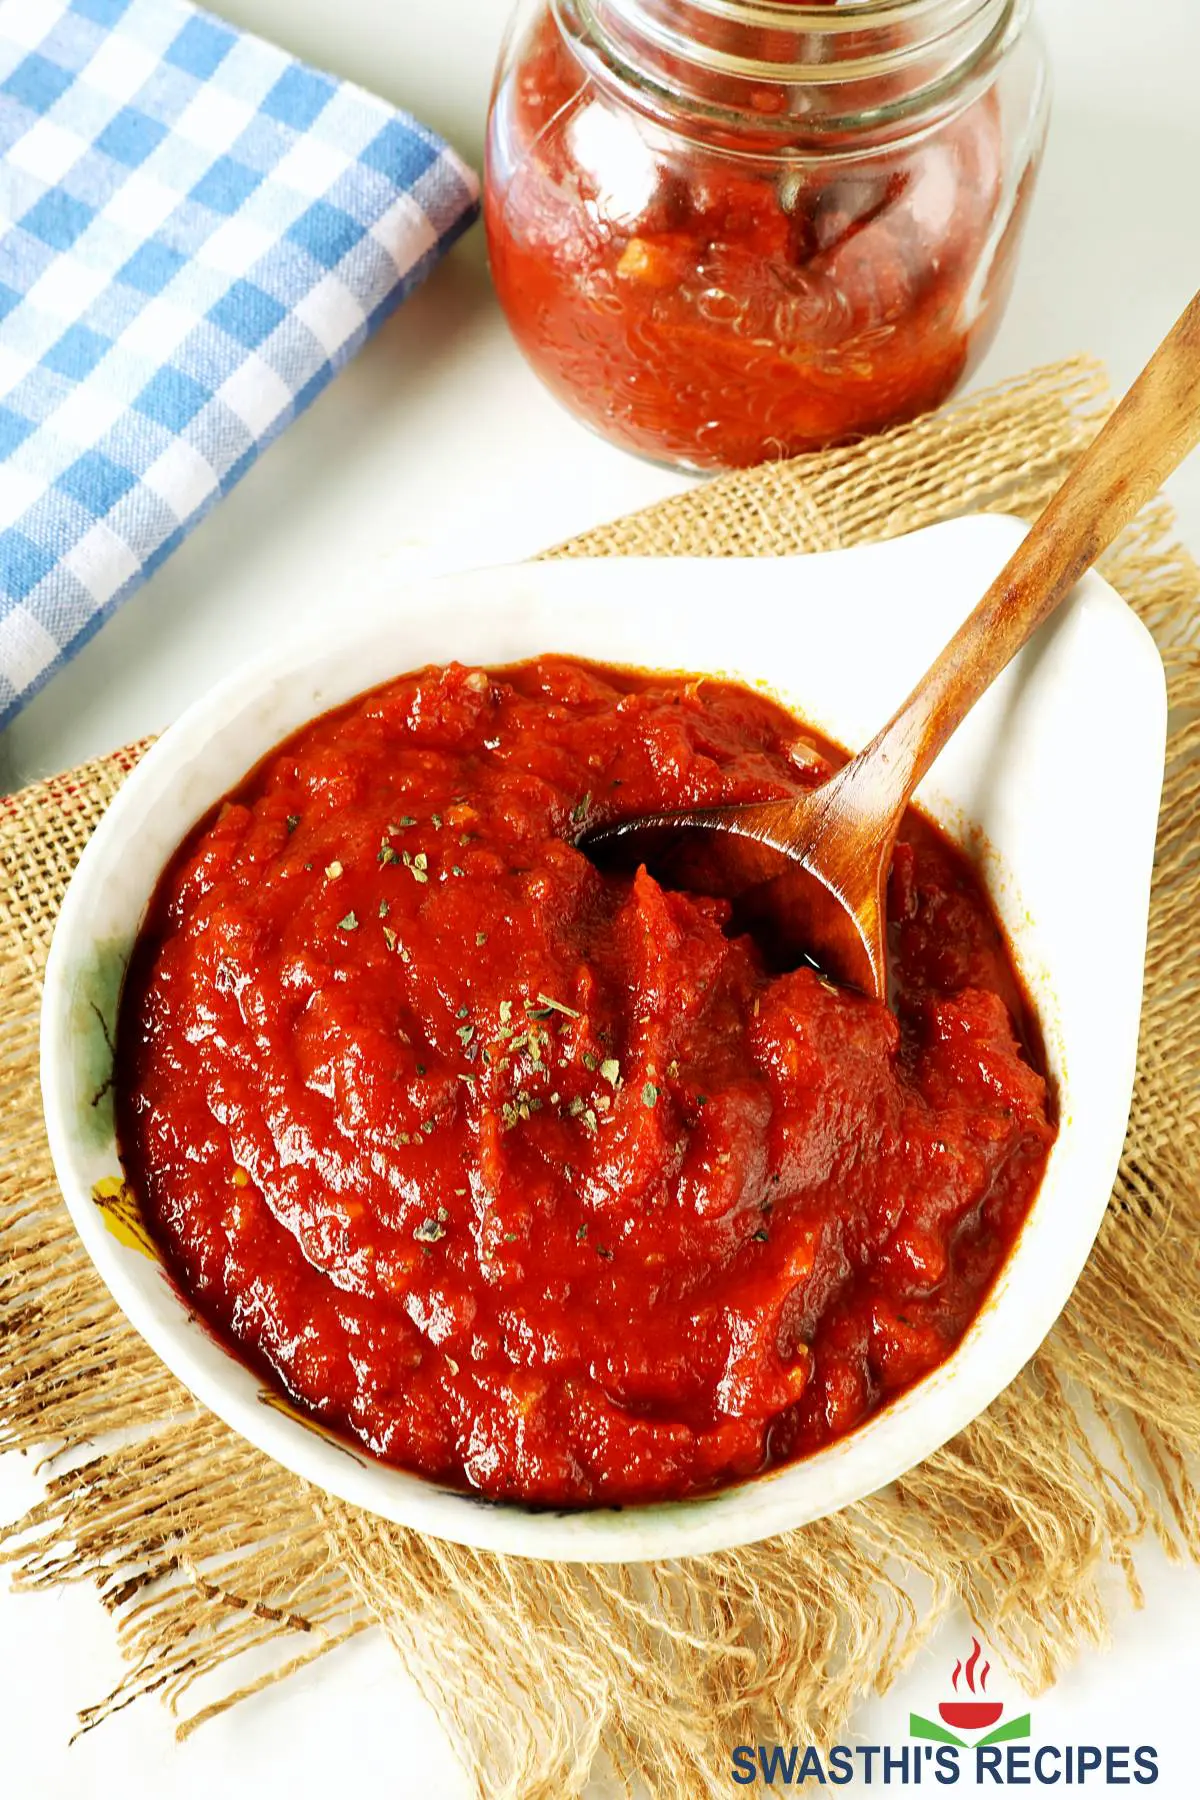 Homemade pizza sauce recipe with canned tomatoes